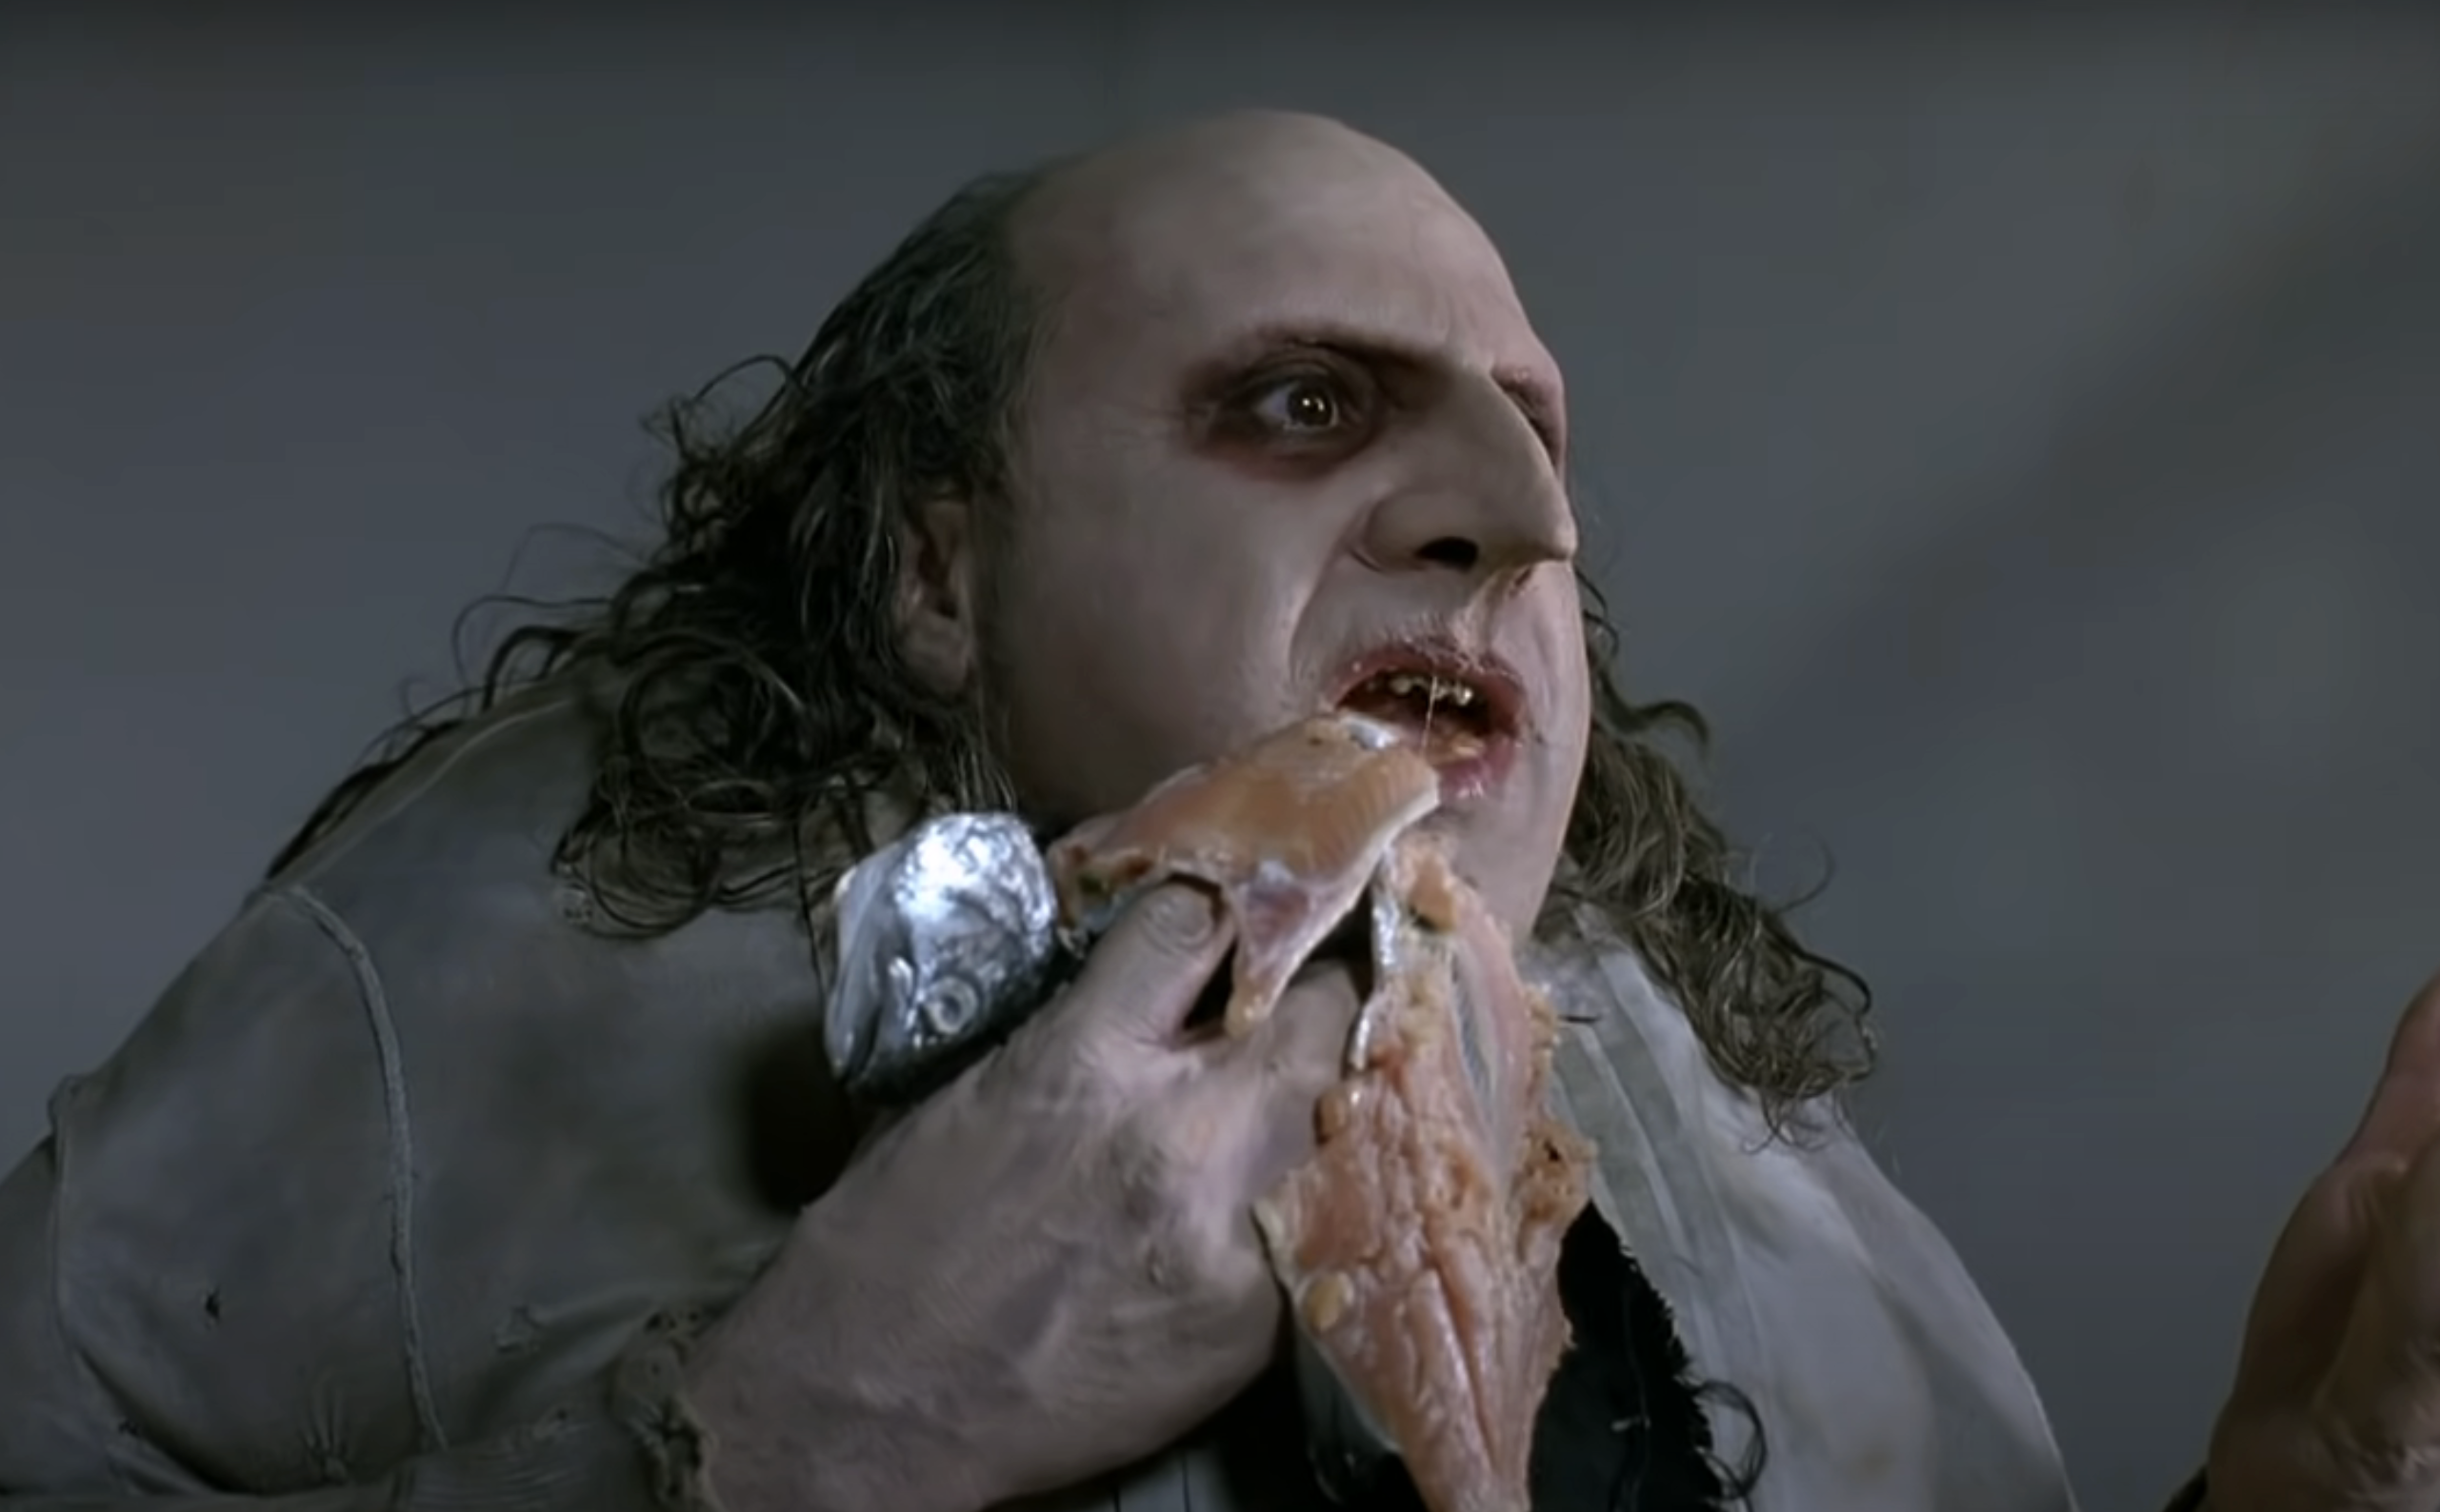 Character portrayed by Danny DeVito in &quot;Batman Returns&quot; grips a fish with his mouth, wearing a stained shirt and coat with frilled edges